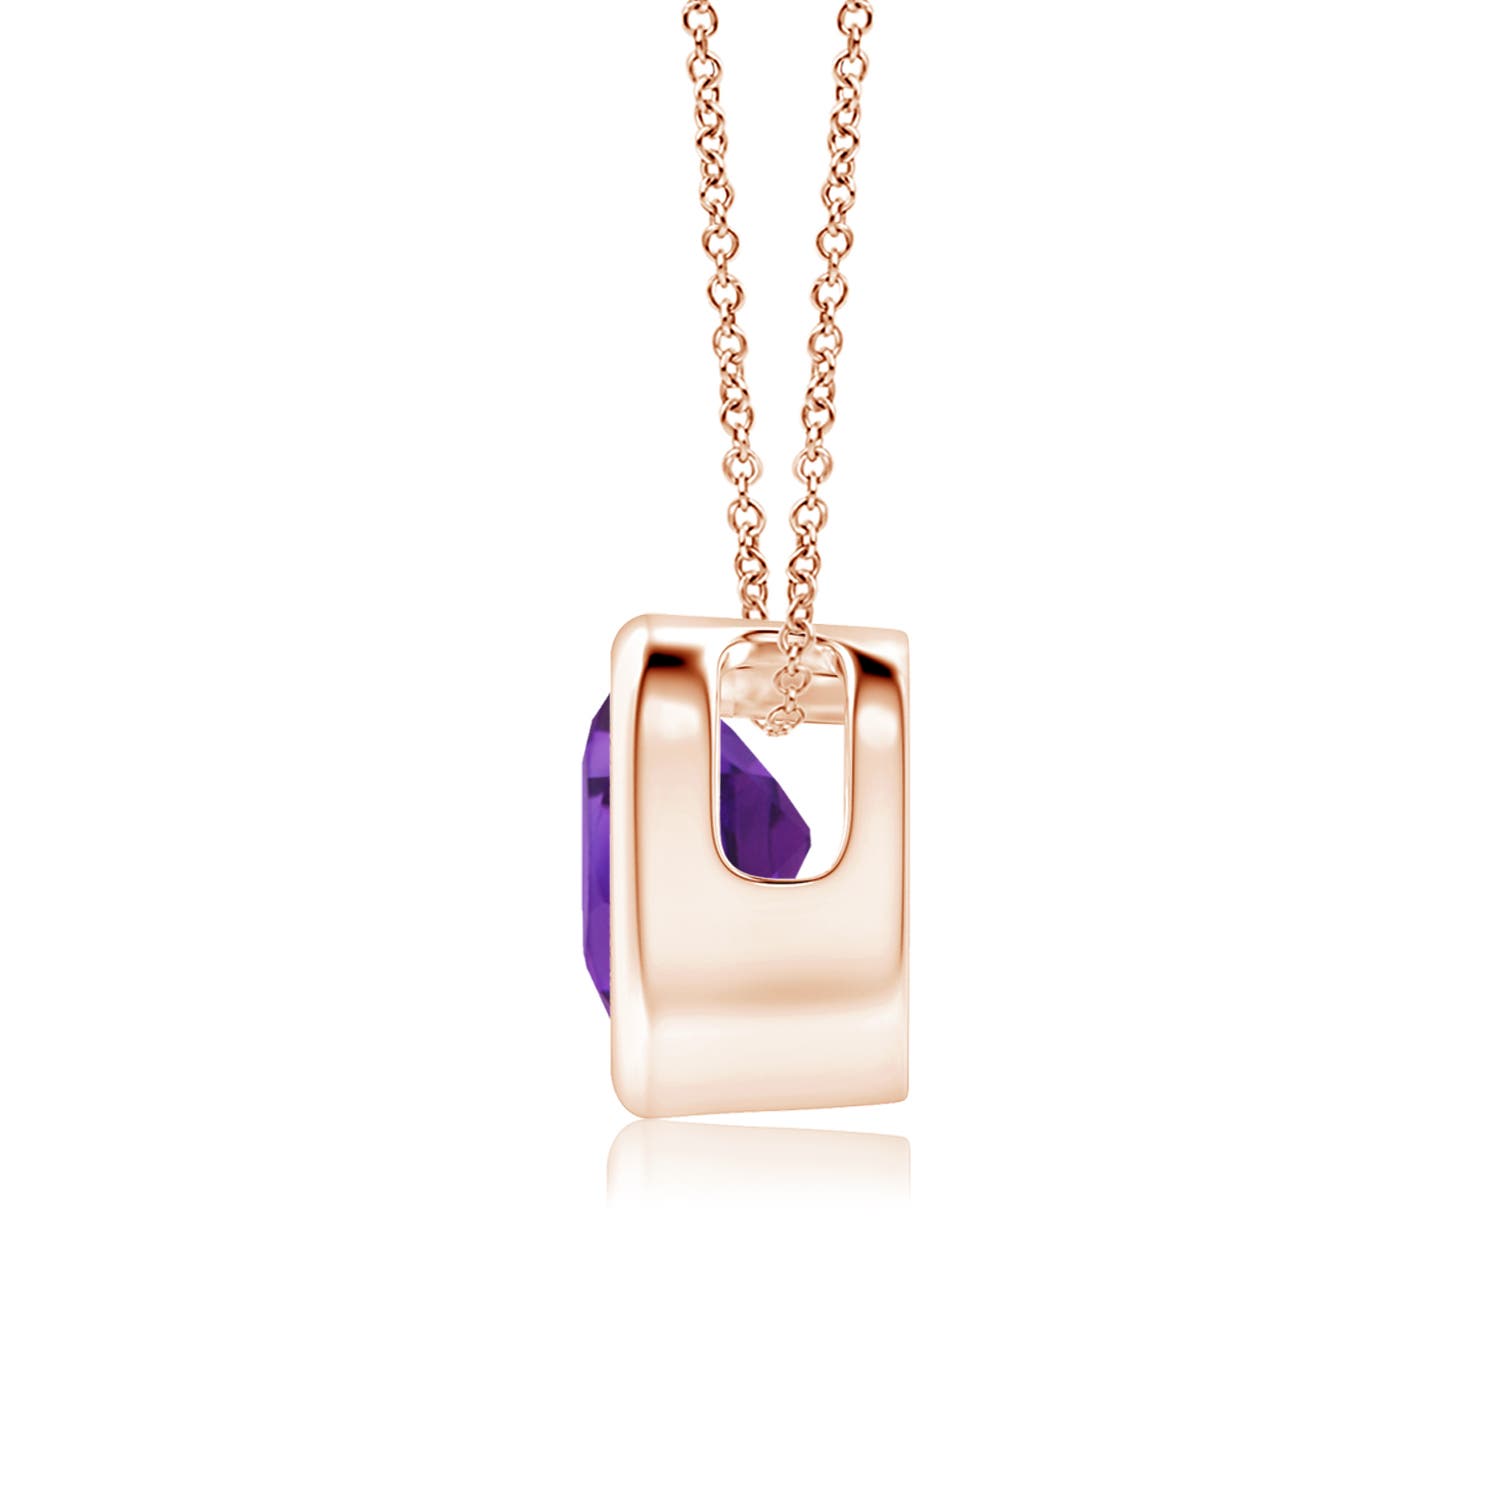 AAA - Amethyst / 0.35 CT / 14 KT Rose Gold